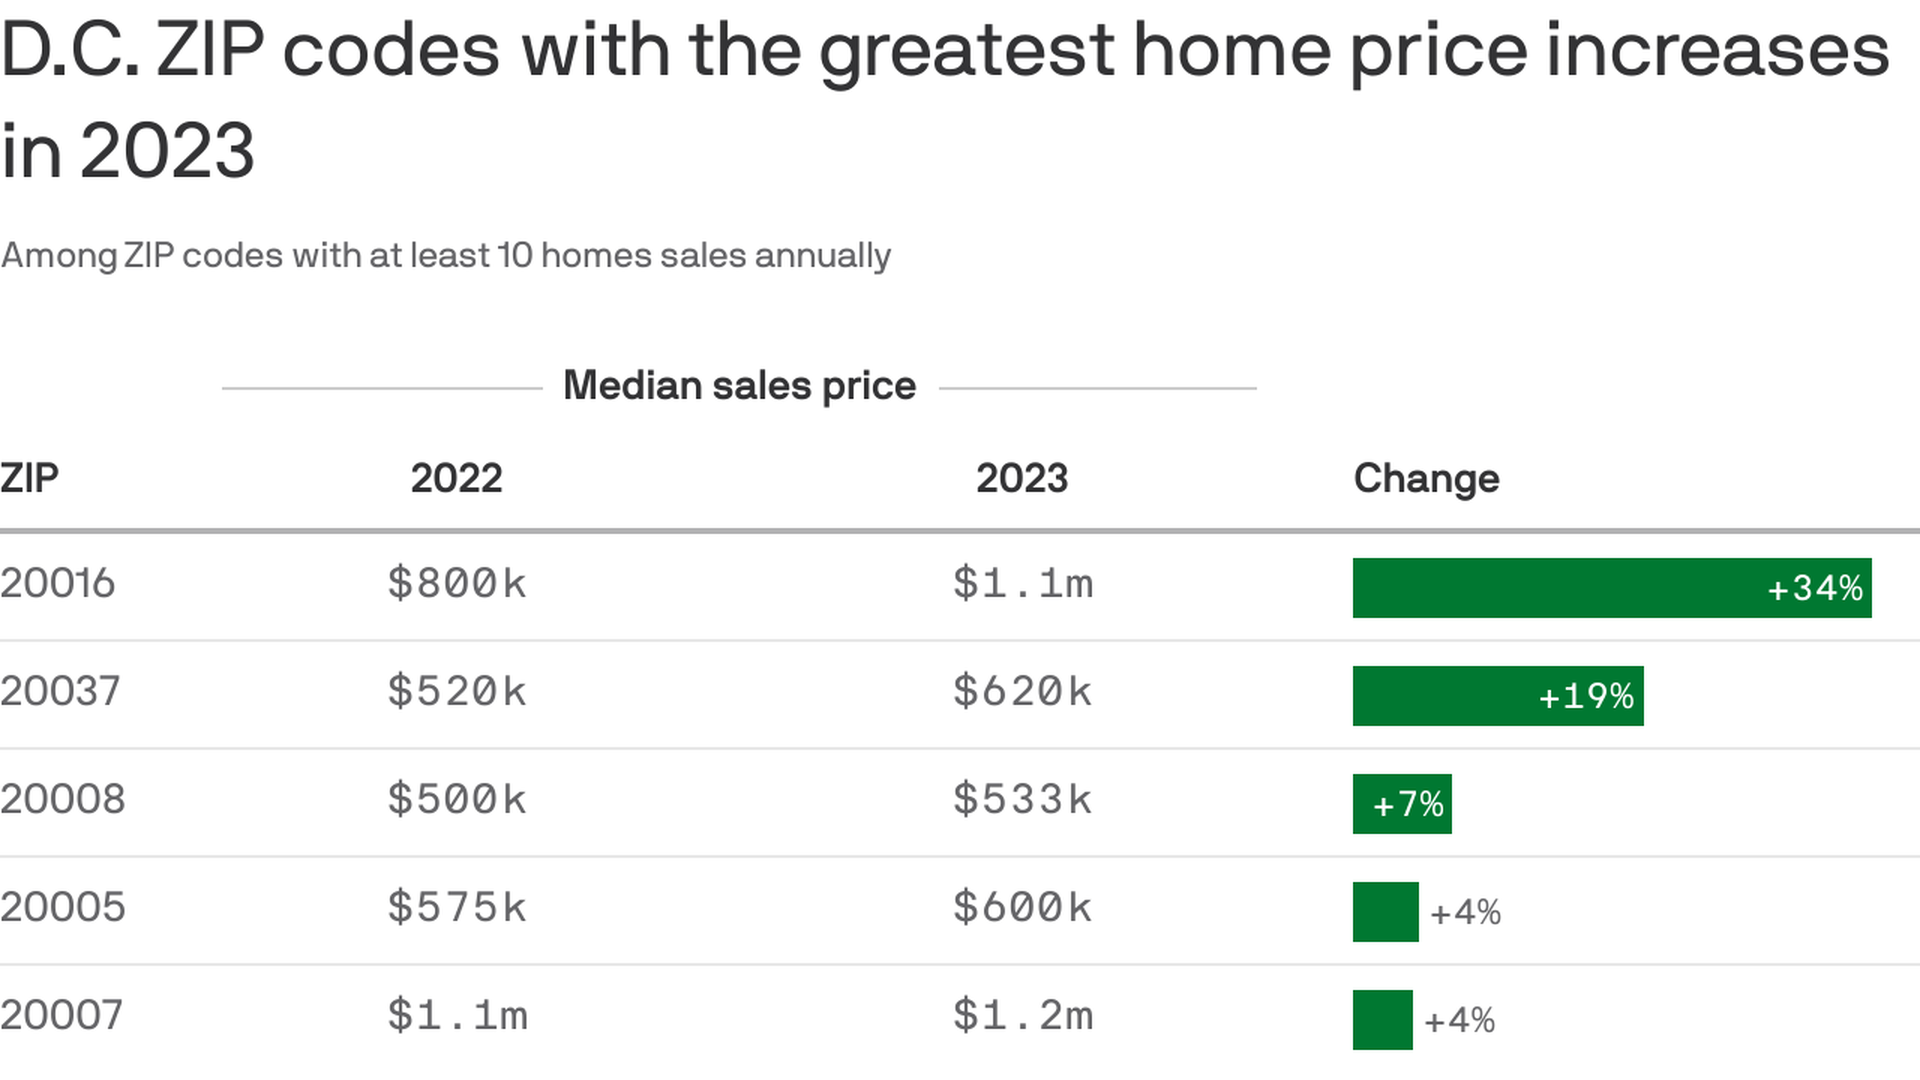 Table showing the D.C. zip codes with the greatest change in median home sales prices from 2022 to 2023 was 20016 with +34%, 20037 with +19%, 20008 with +7%, 20005 with +4% and 20007 with +4%.